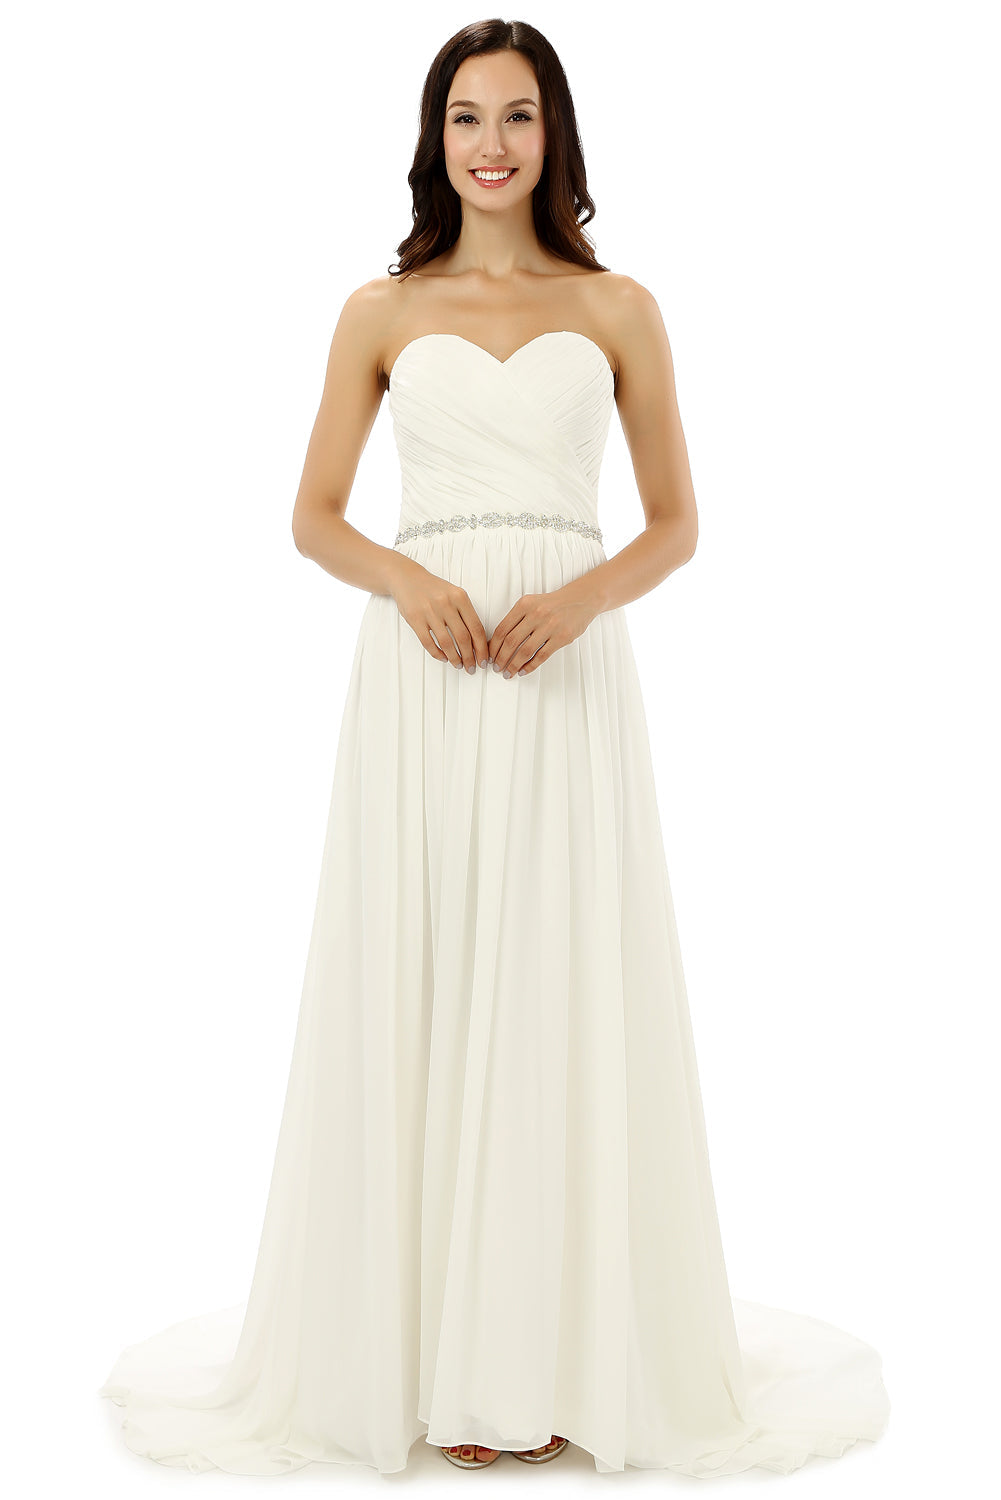 Party Dress Fancy, White Chiffon Sweetheart With Beading Pleats Bridesmaid Dresses